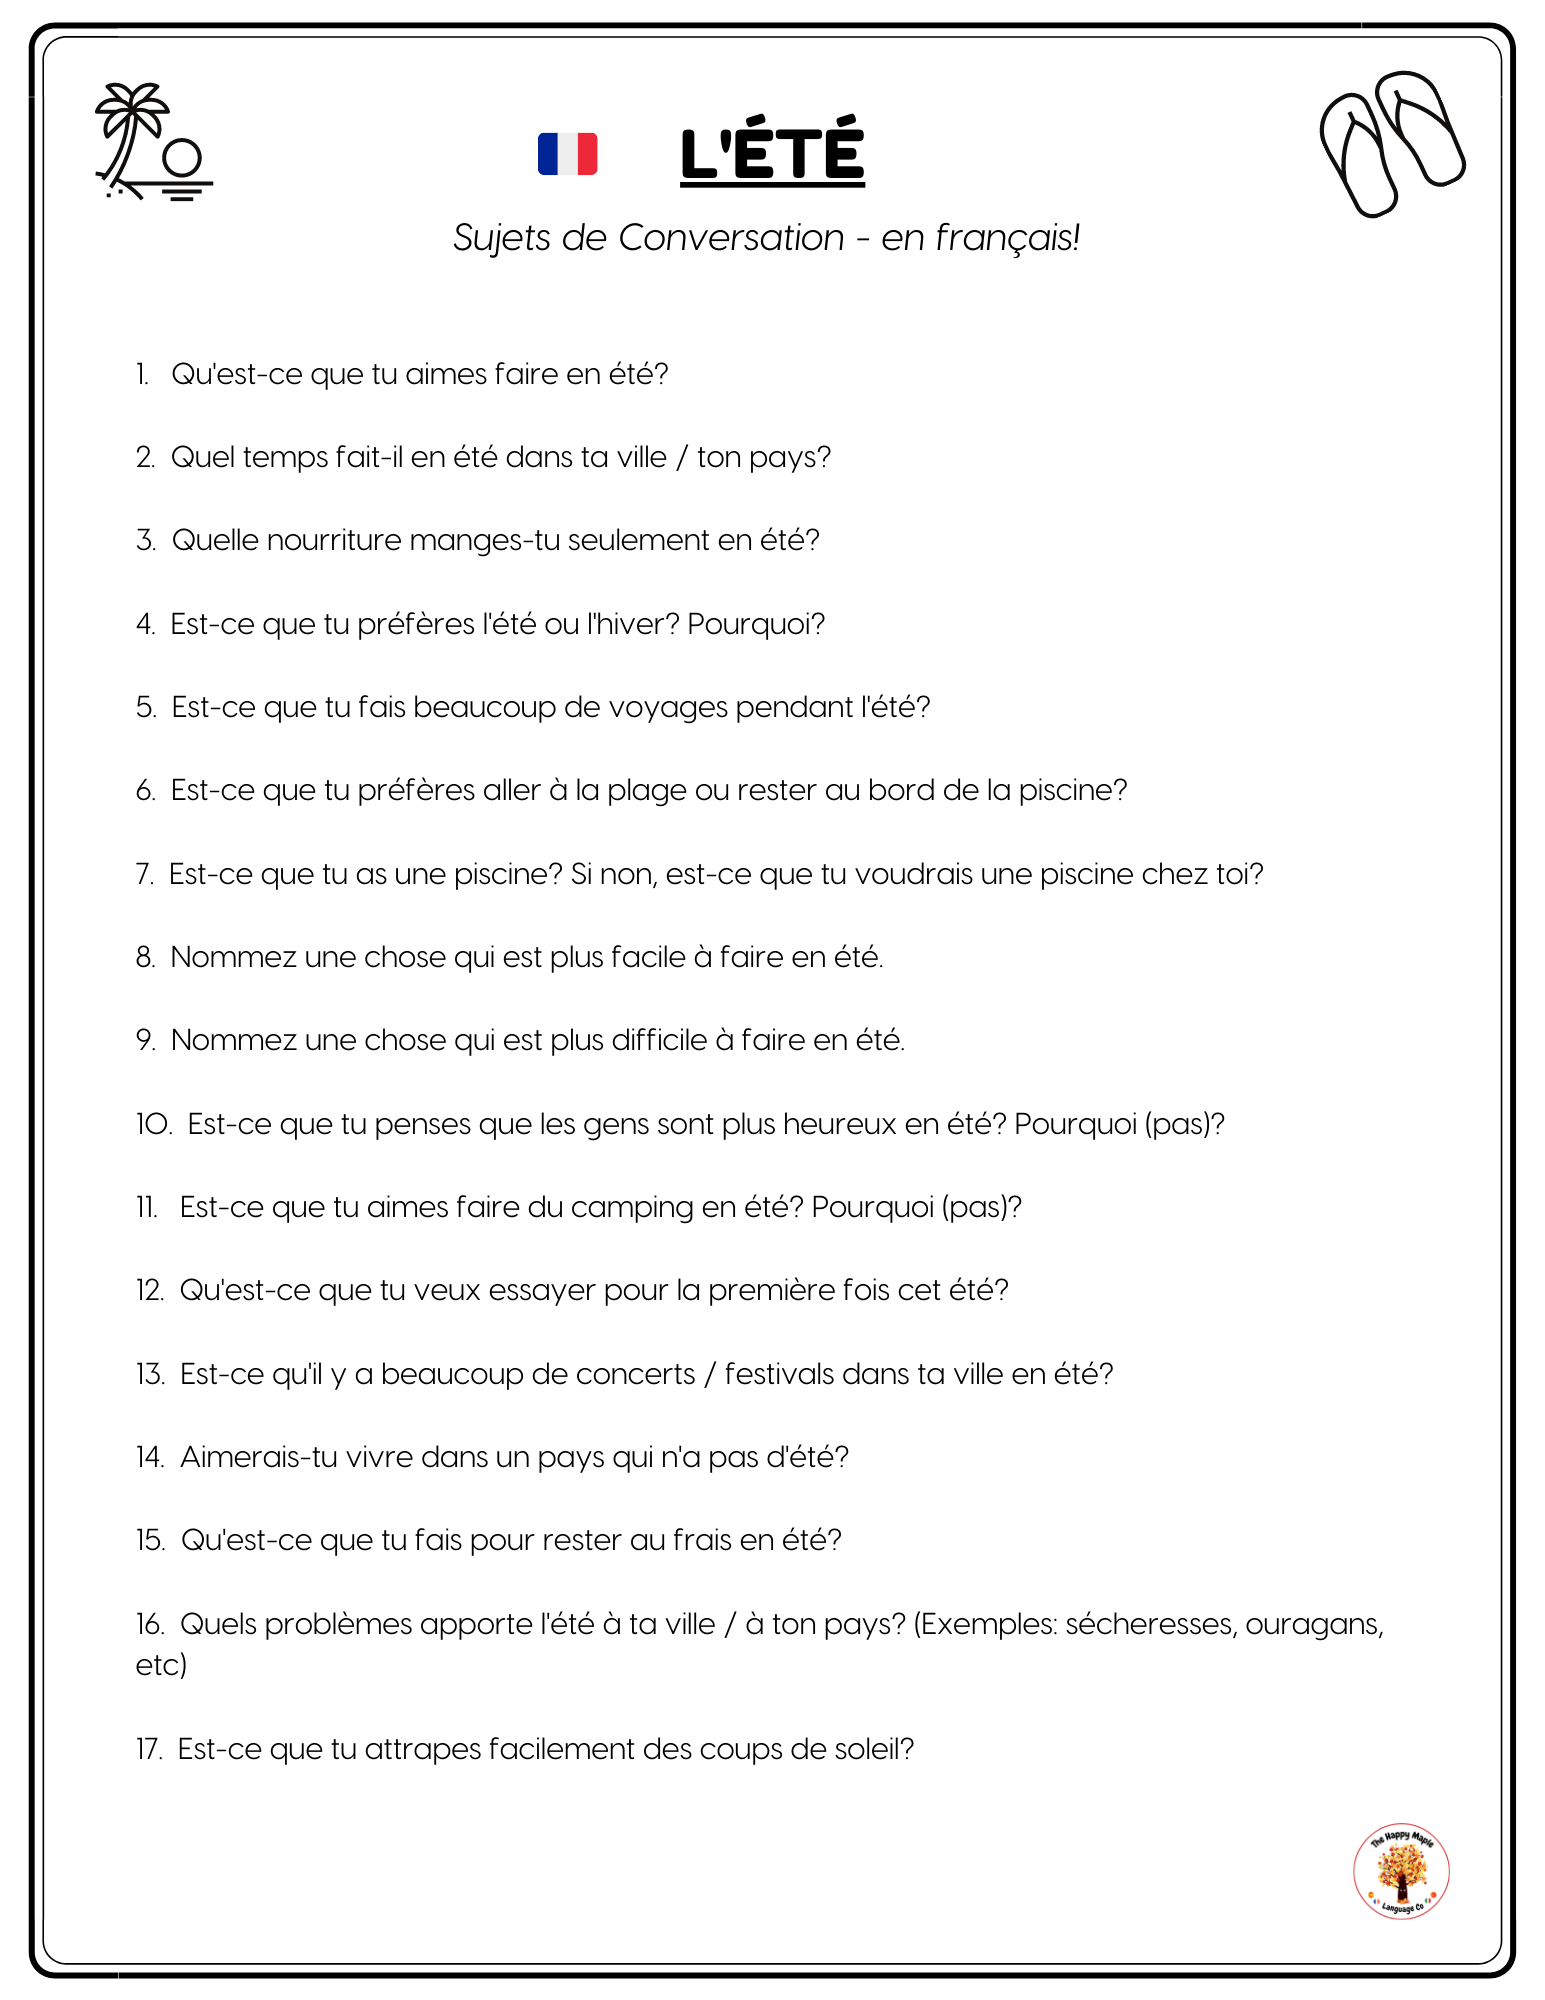 French Class Conversation Questions about Summer - French Speaking Activity